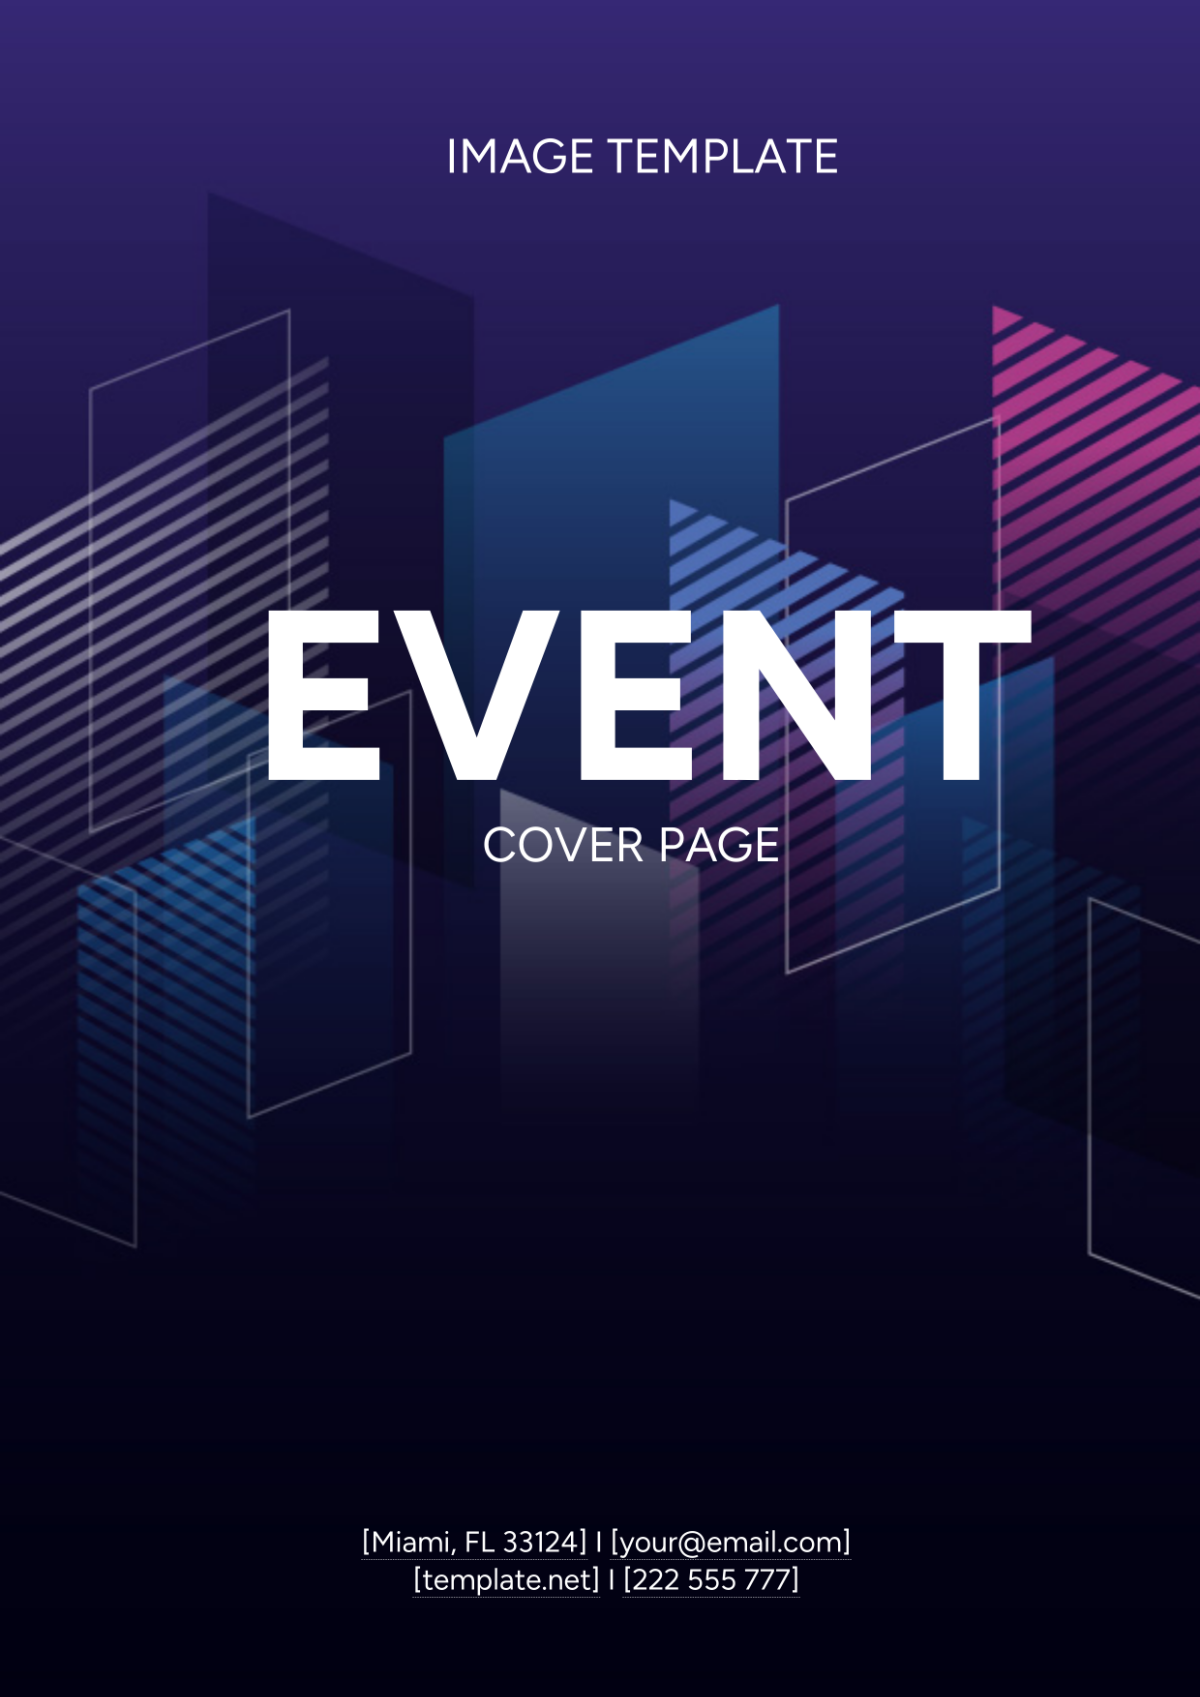 Event Cover Page Image Template